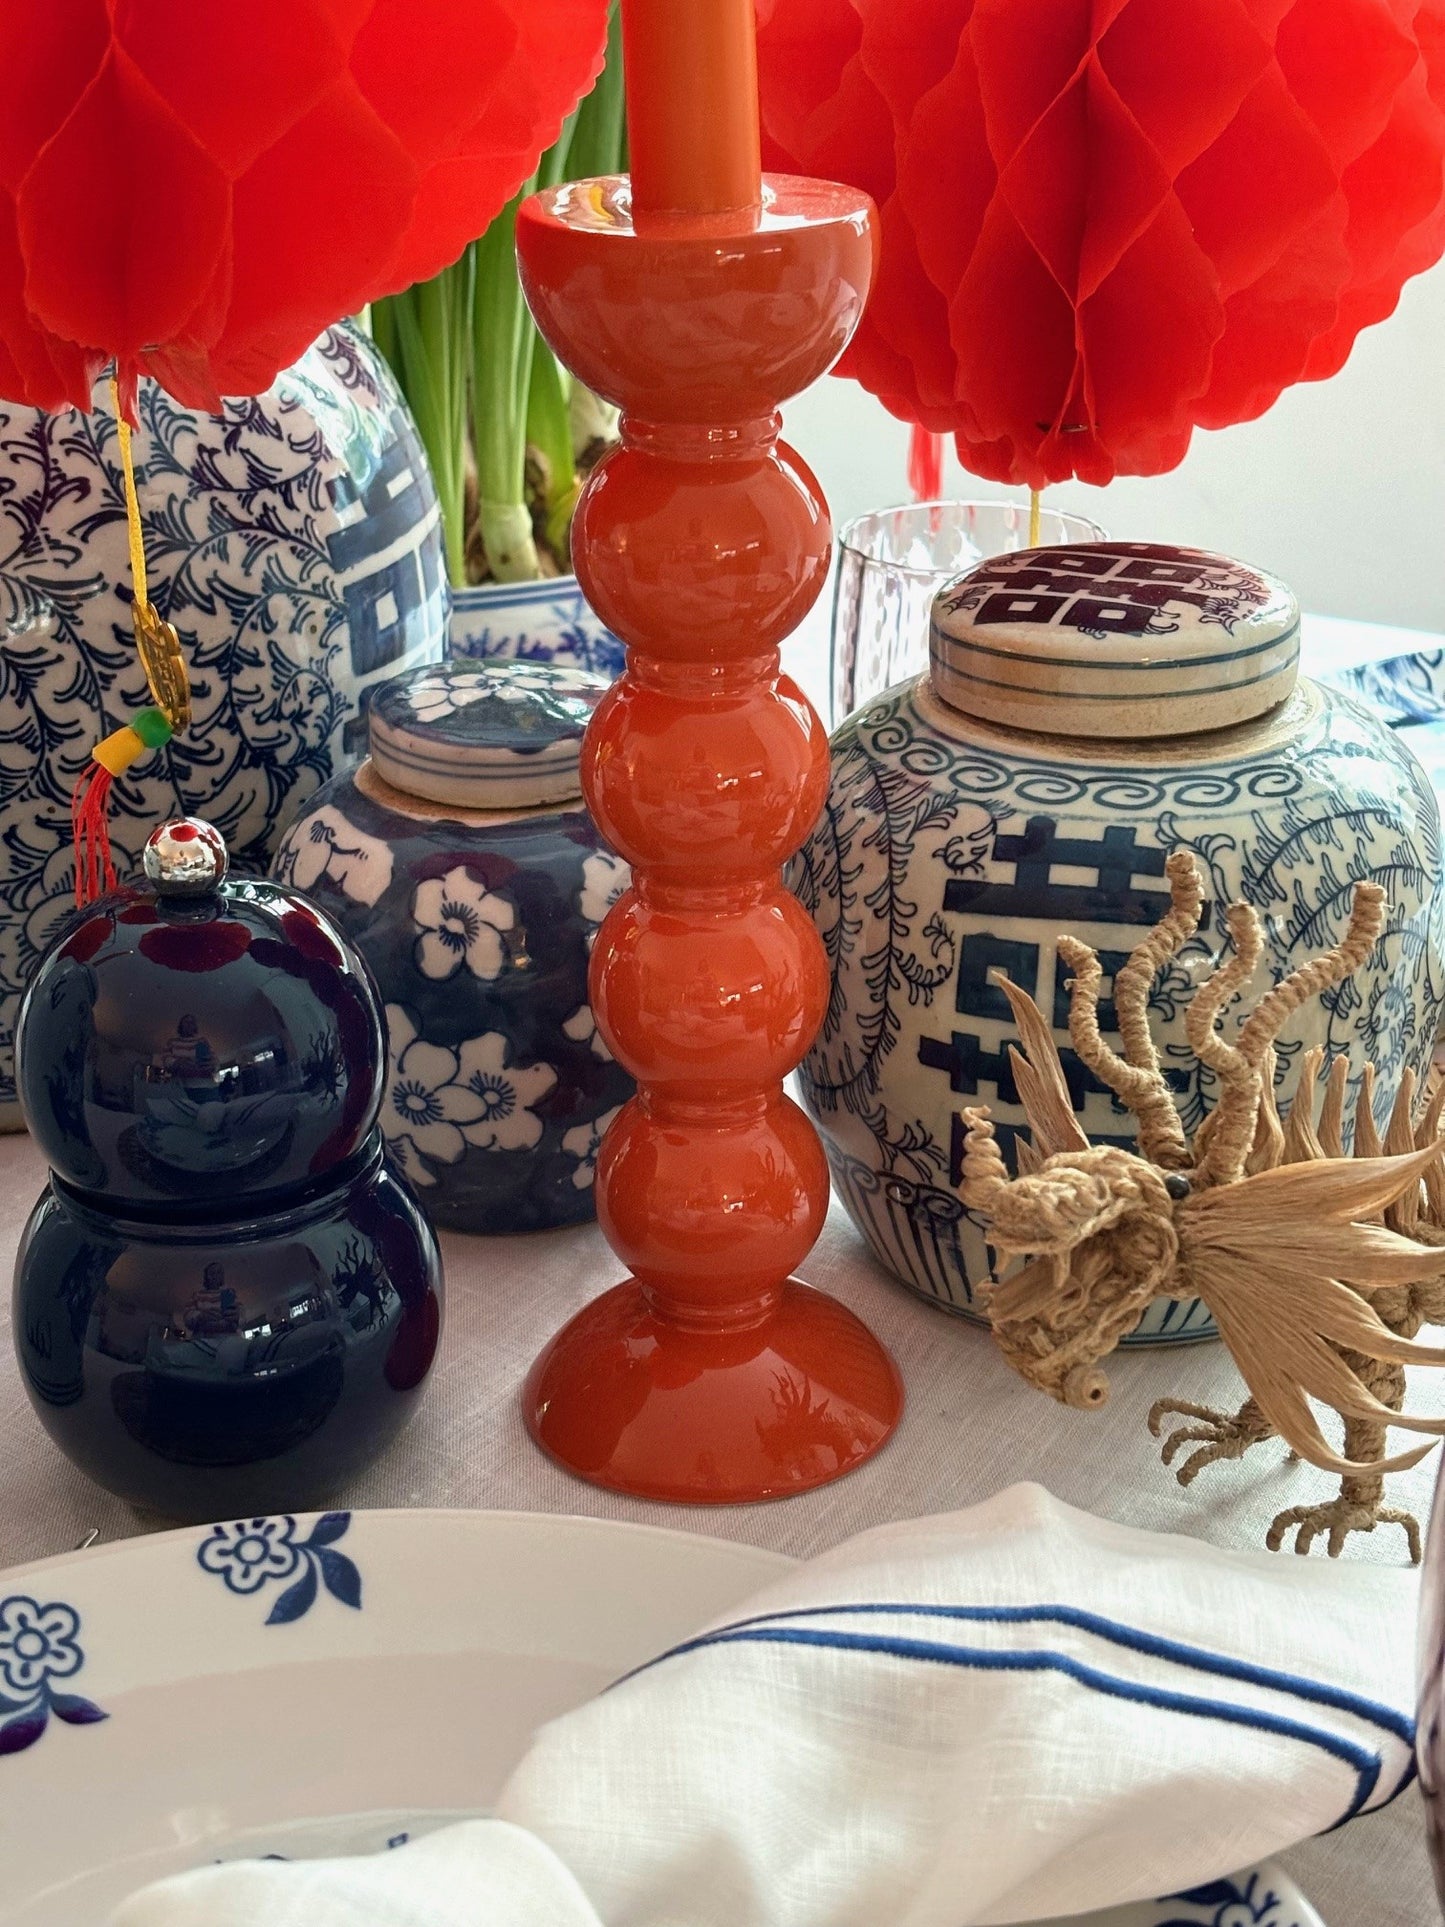 A Chinese New Year table setting featuring blue and white ginger jars, an orange candlestick and a navy blue chubbie pepper grinder.